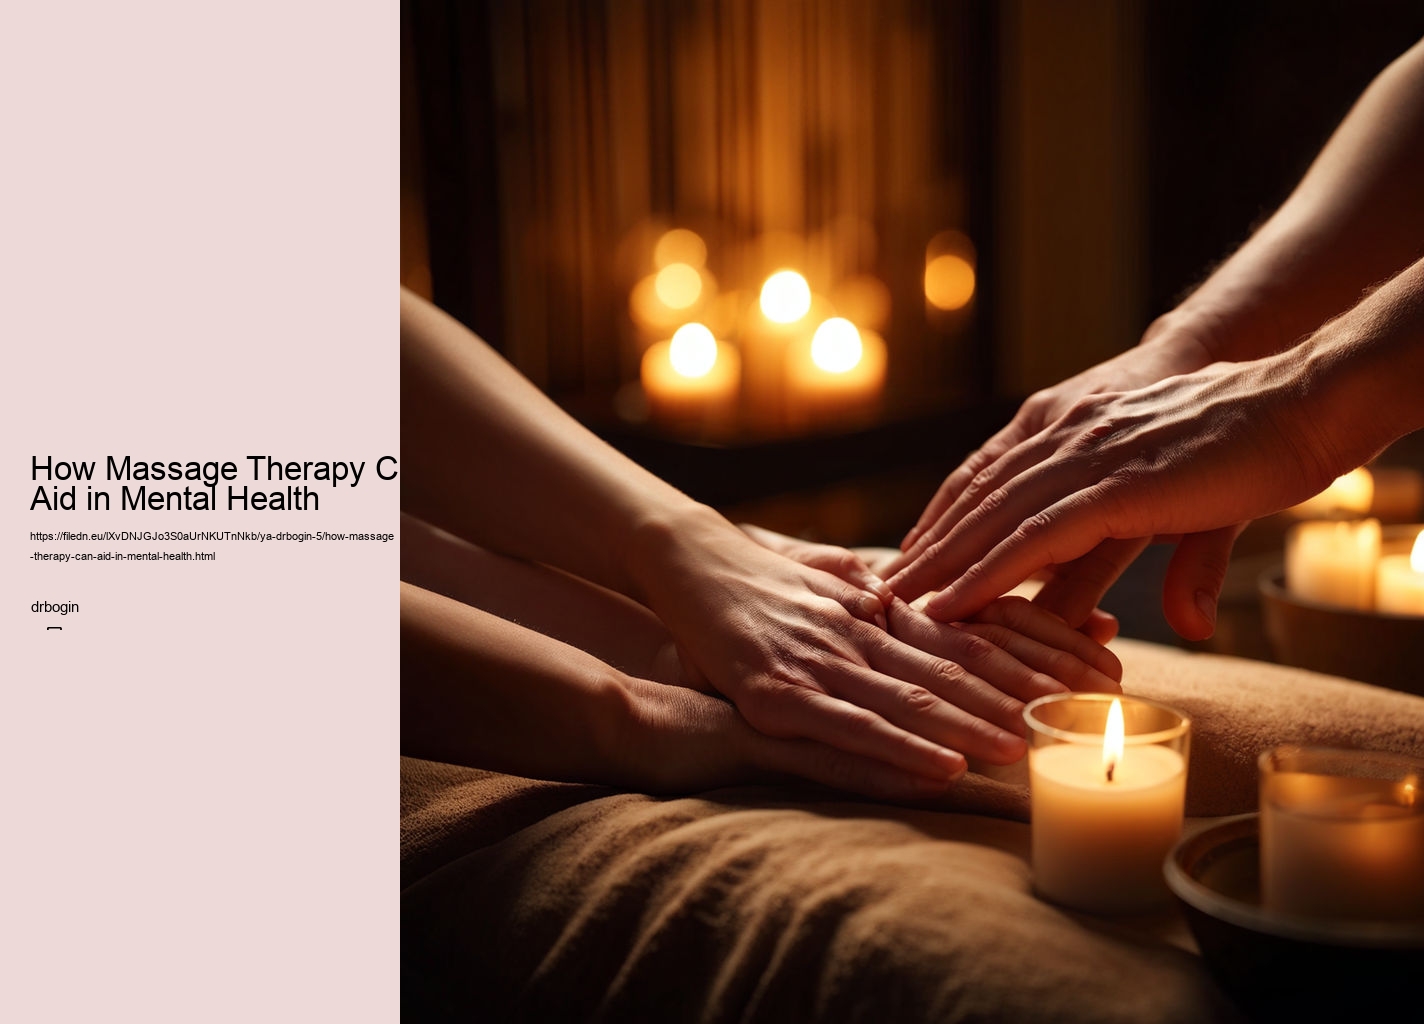 How Massage Therapy Can Aid in Mental Health